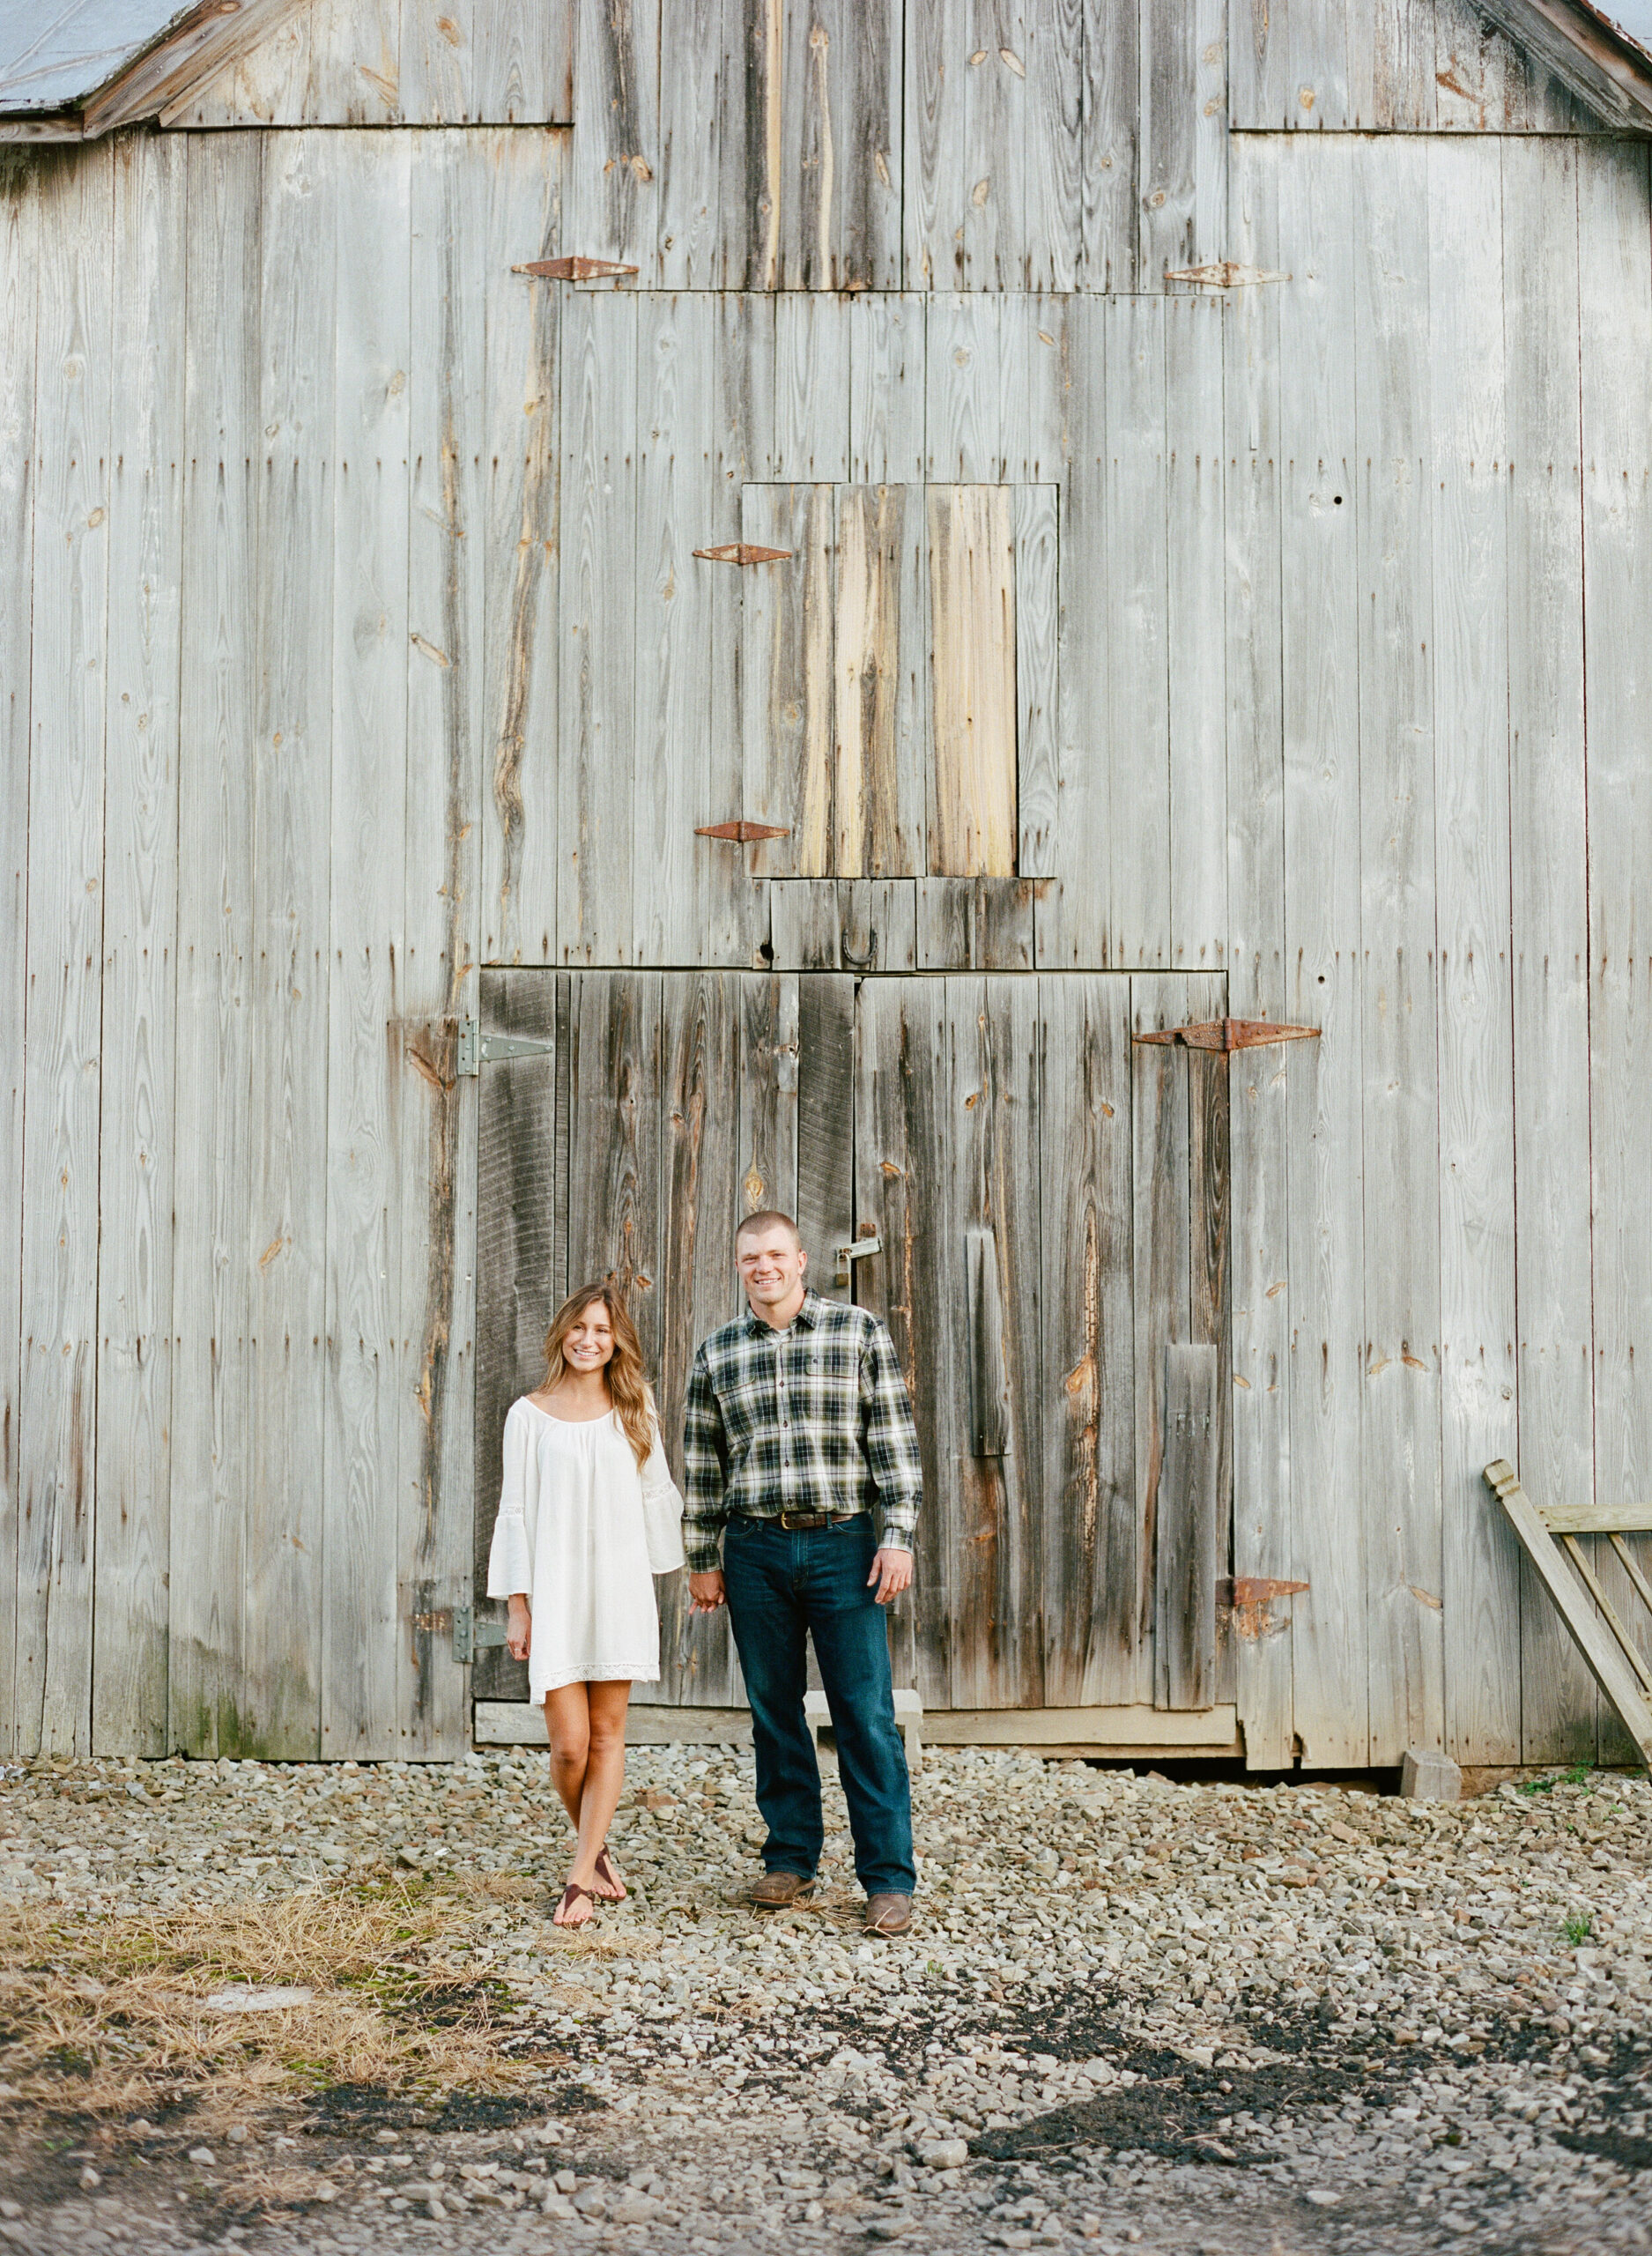 Bri and Adam chose a more lived in style for their photos, which we took at Adam’s family farm.